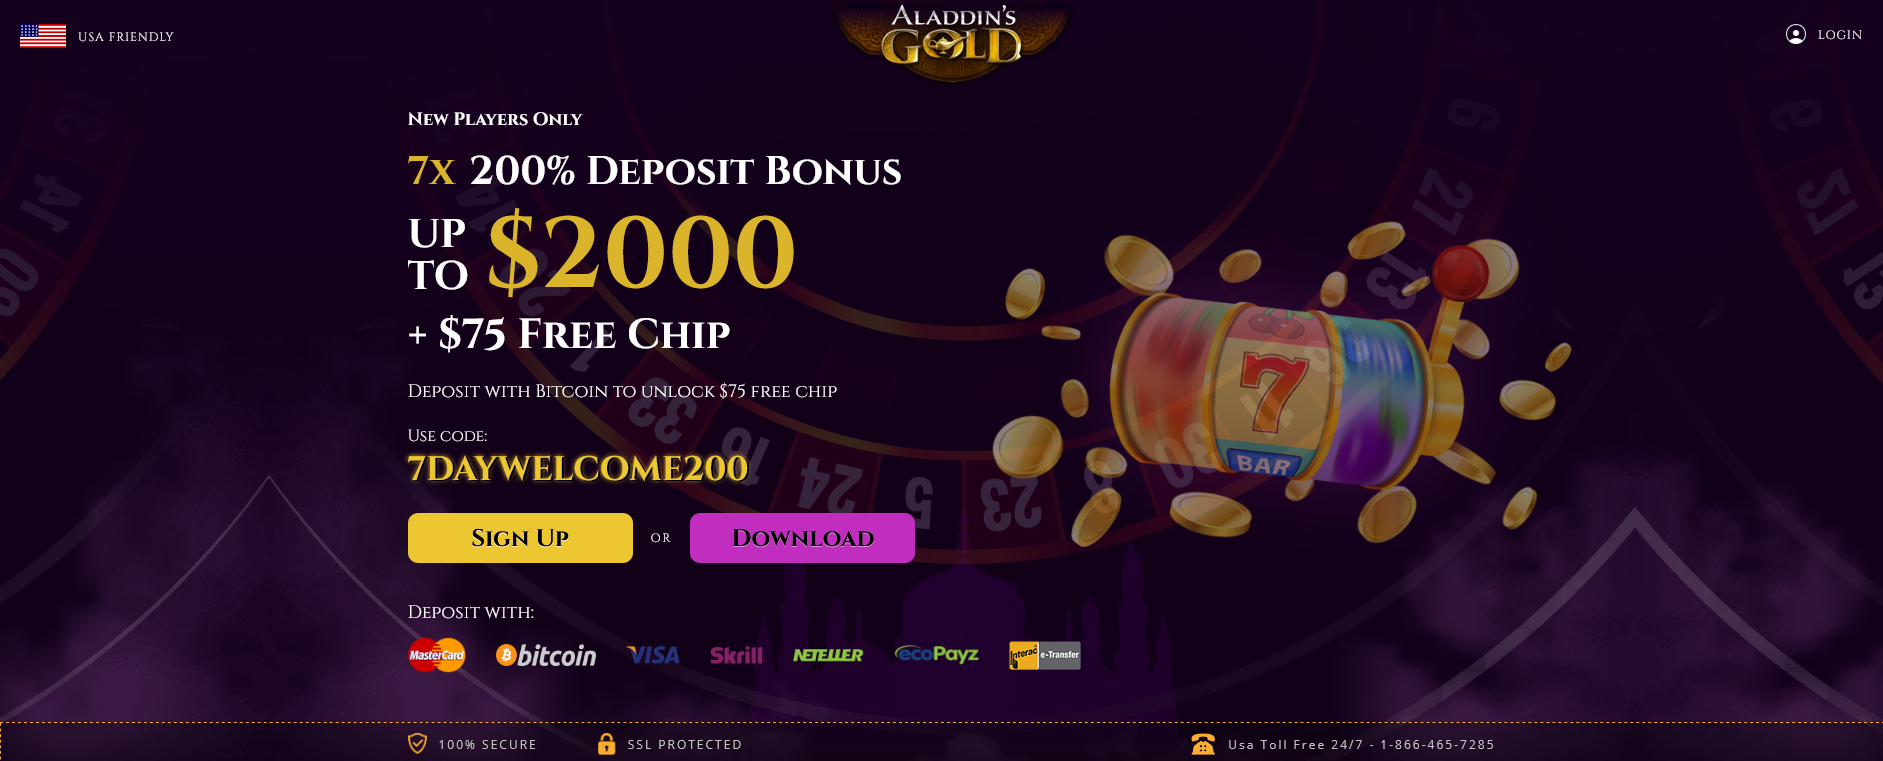 New Players Only 7x 200% Deposit Bonus
                                                          UP TO $2000 +
                                                          $75 Free Chip